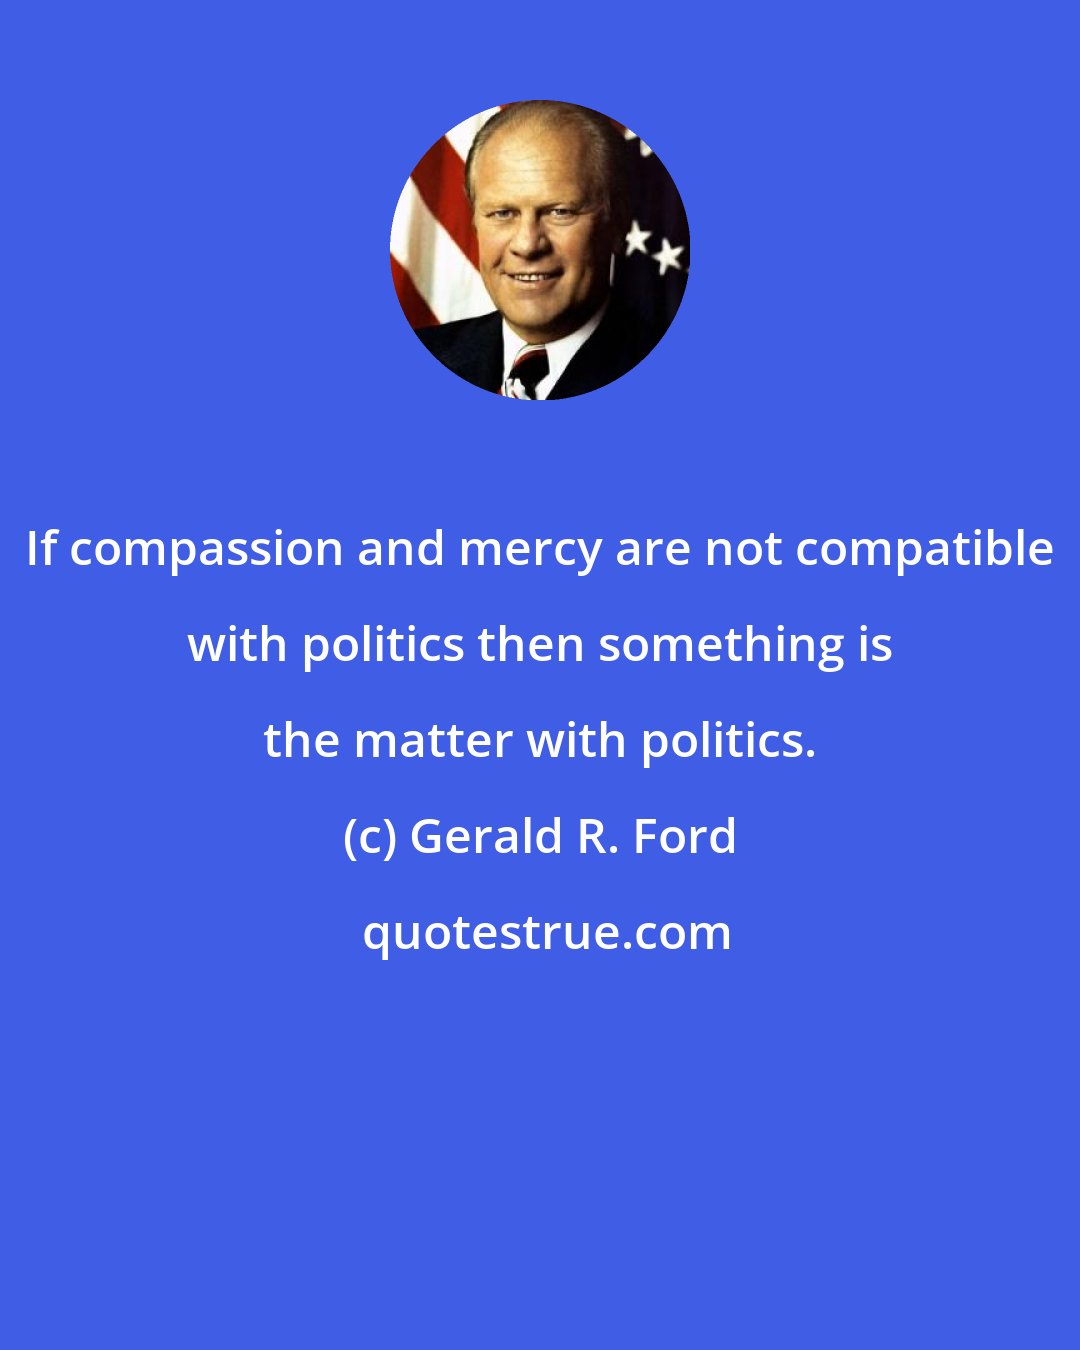 Gerald R. Ford: If compassion and mercy are not compatible with politics then something is the matter with politics.